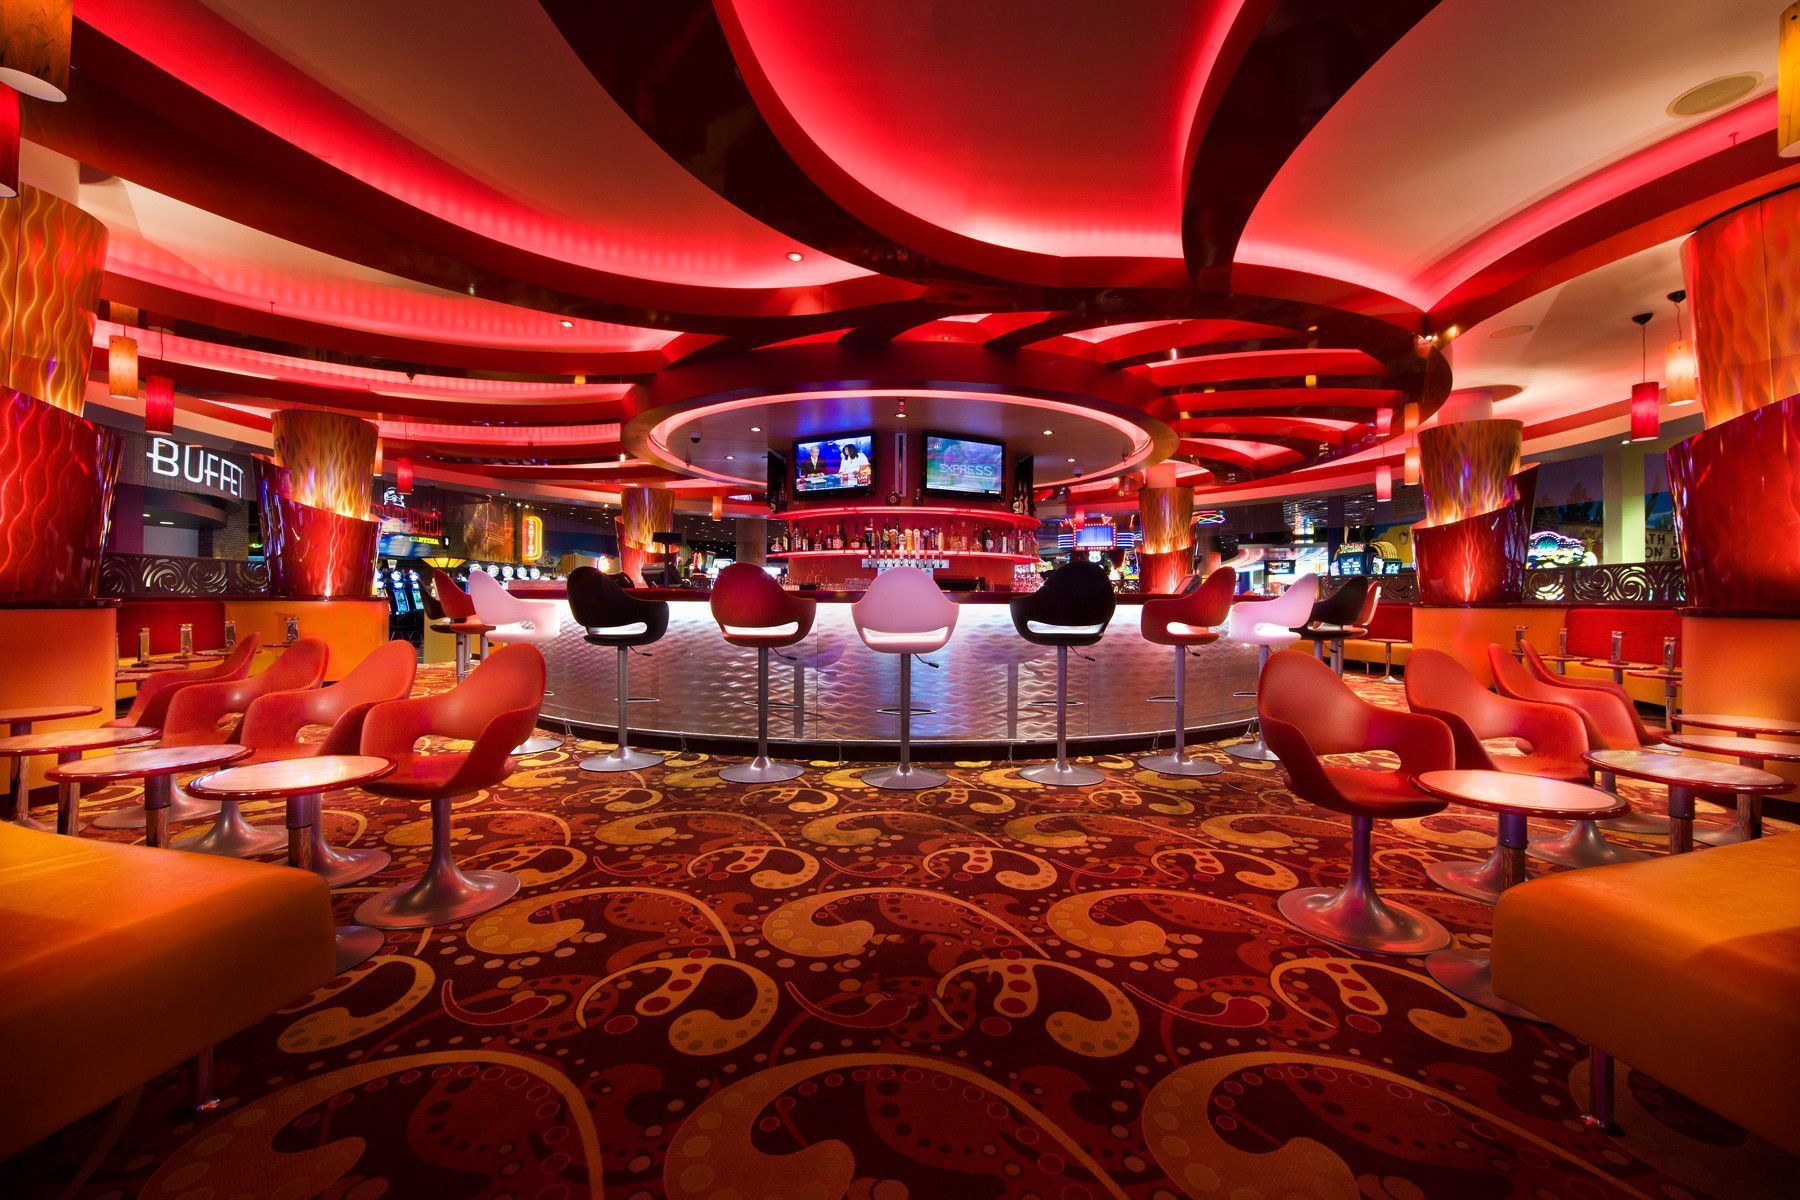 How important is it to use artistic themes in casinos?